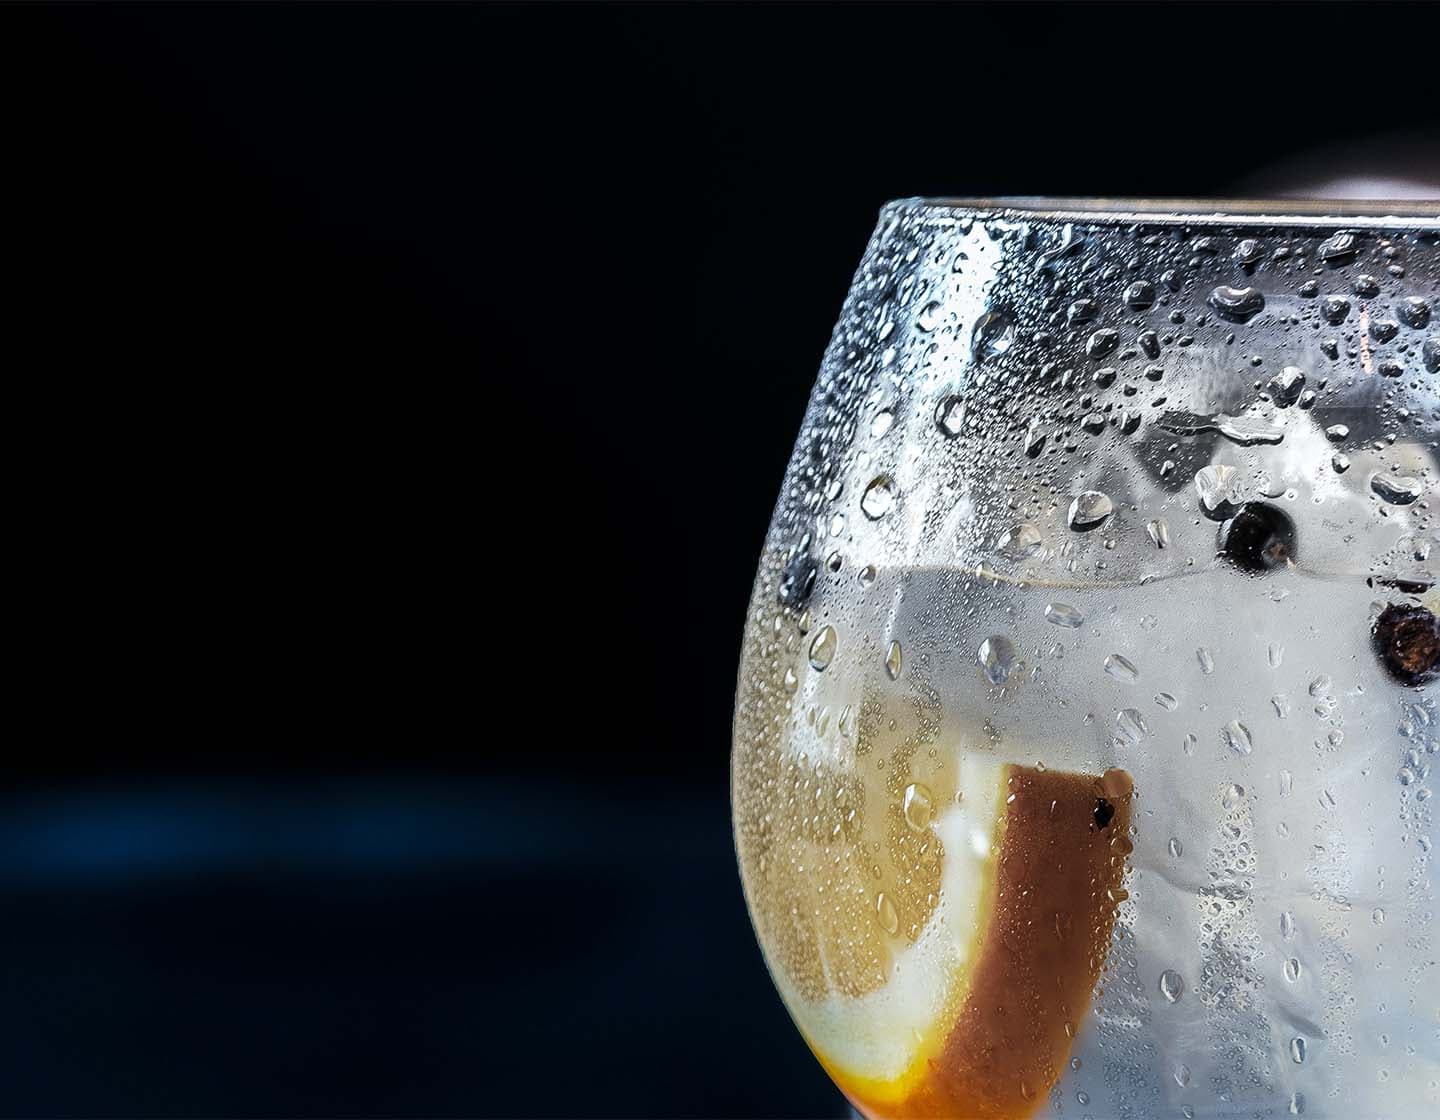 Extreme close-up of a filled gin glass with an orange slice.